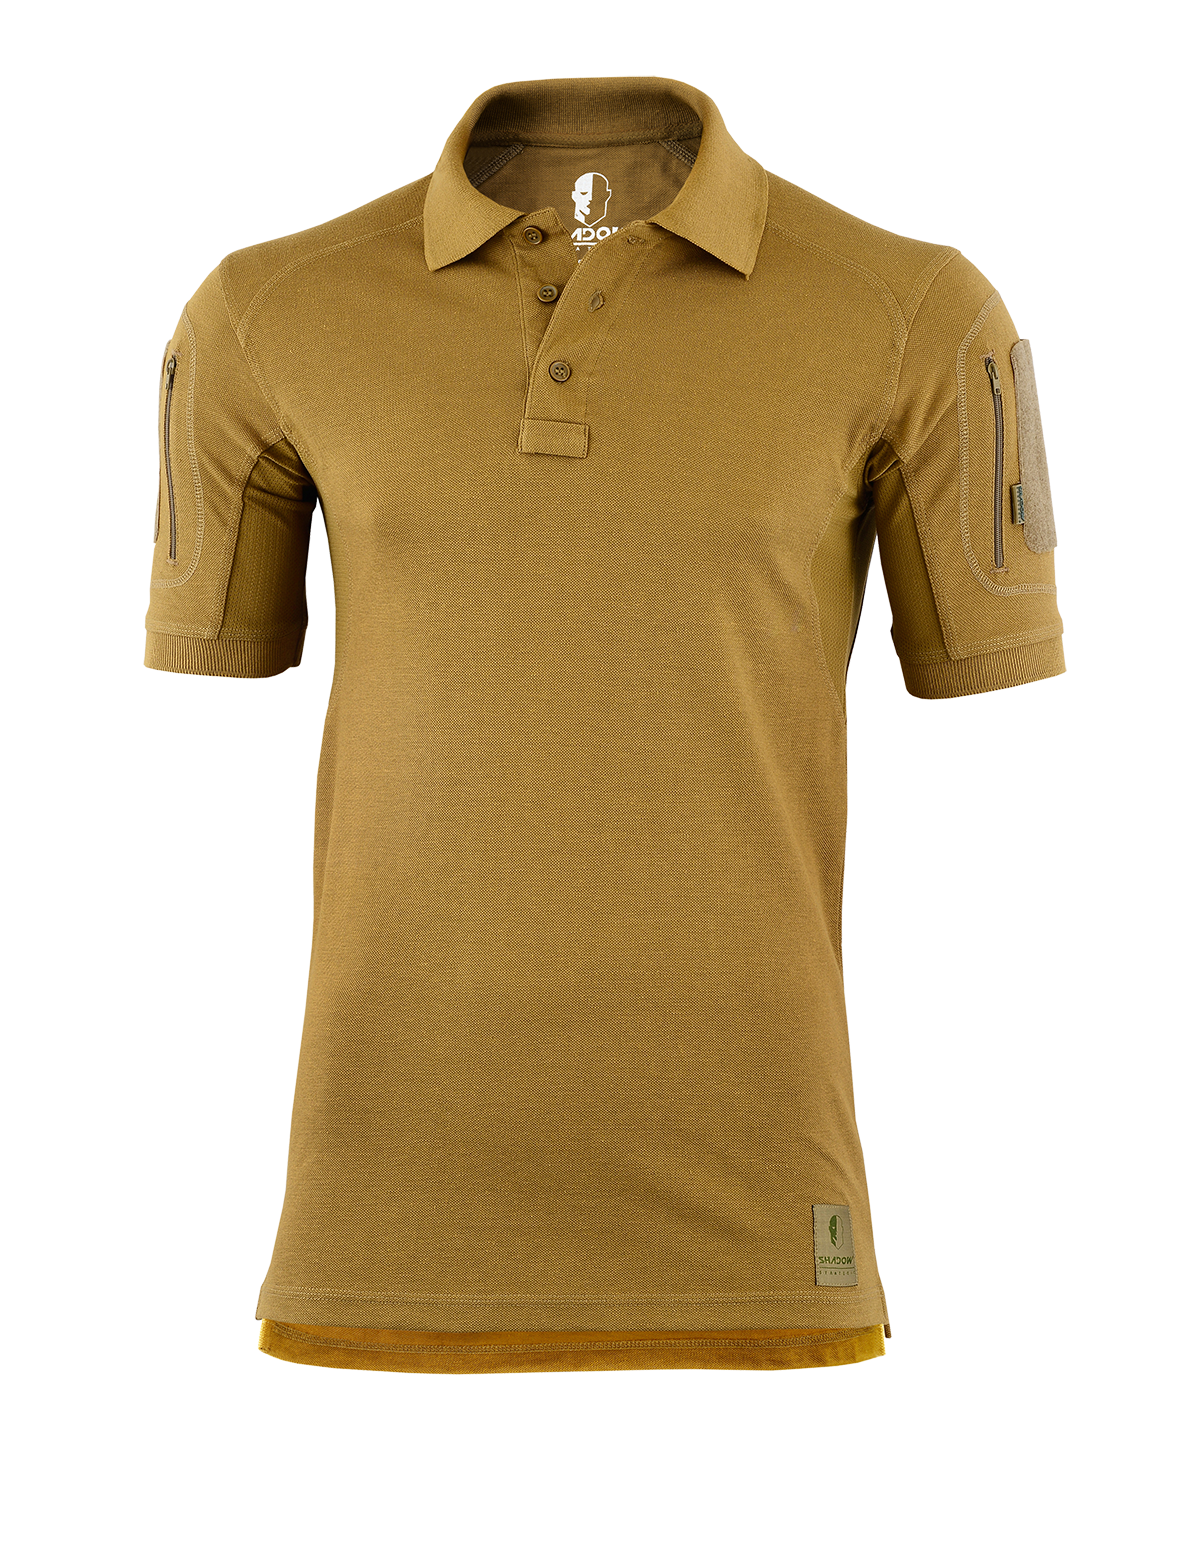 Tactical Zone  Operator Polo shirt Coyote front